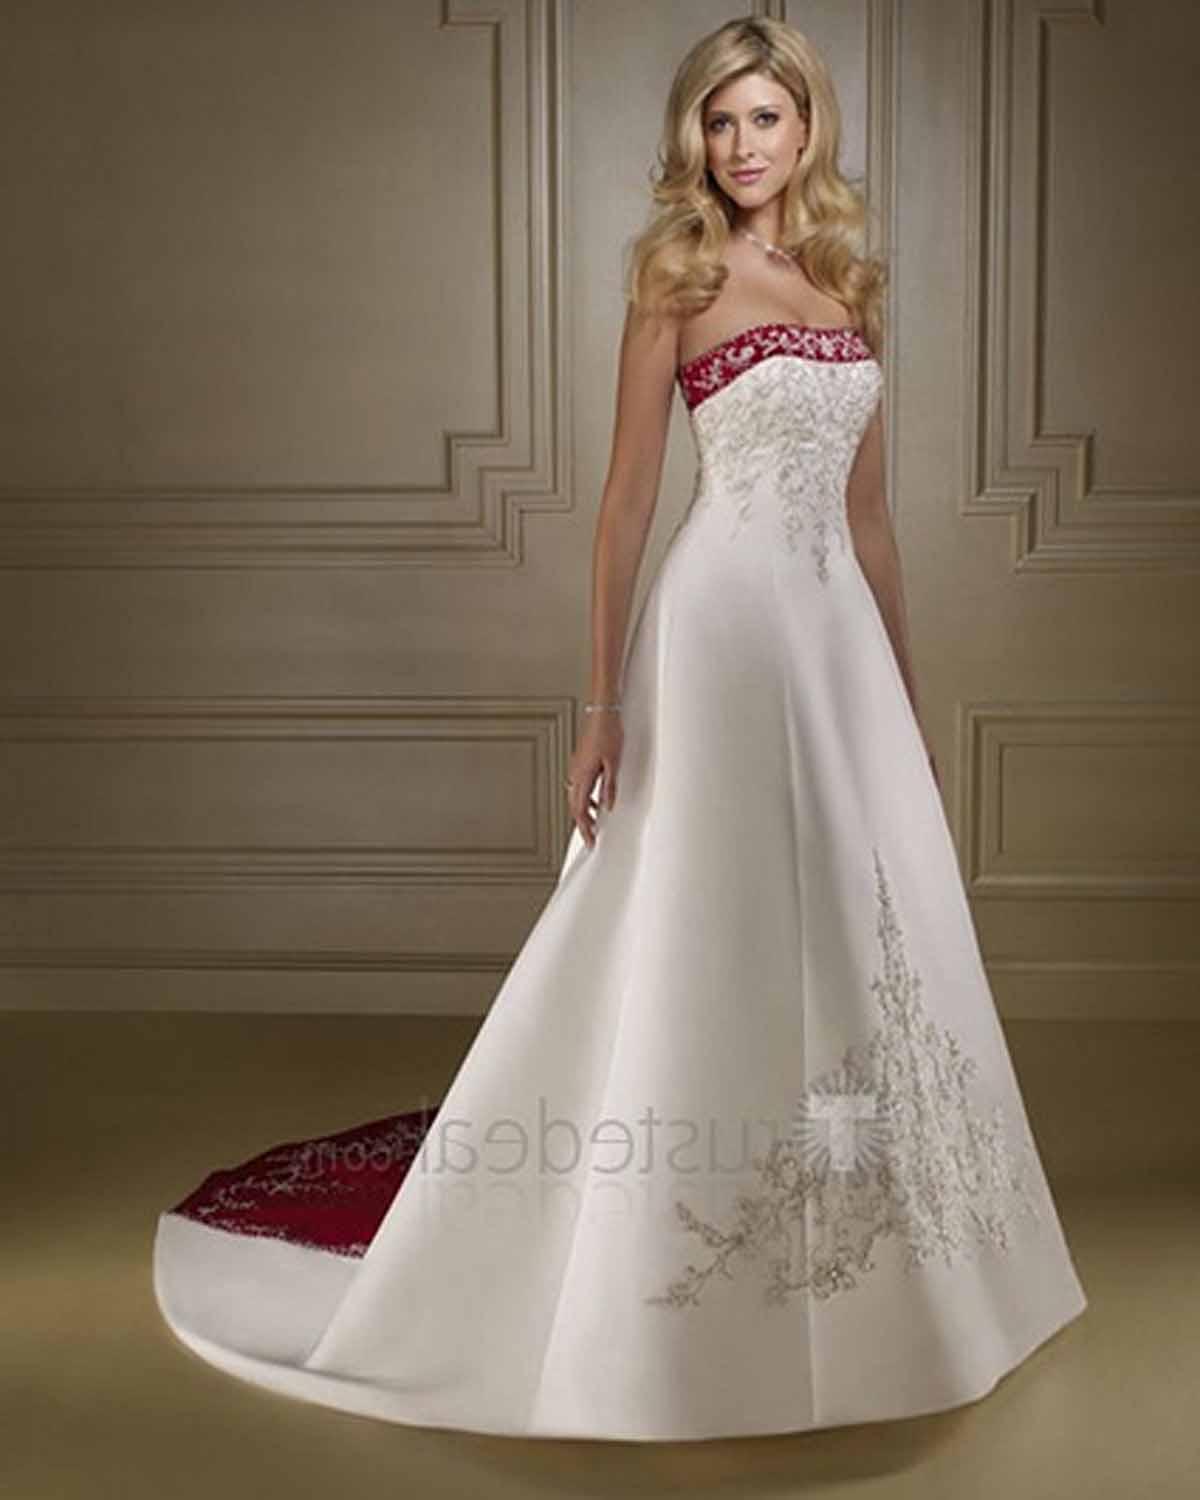 This color wedding dress with